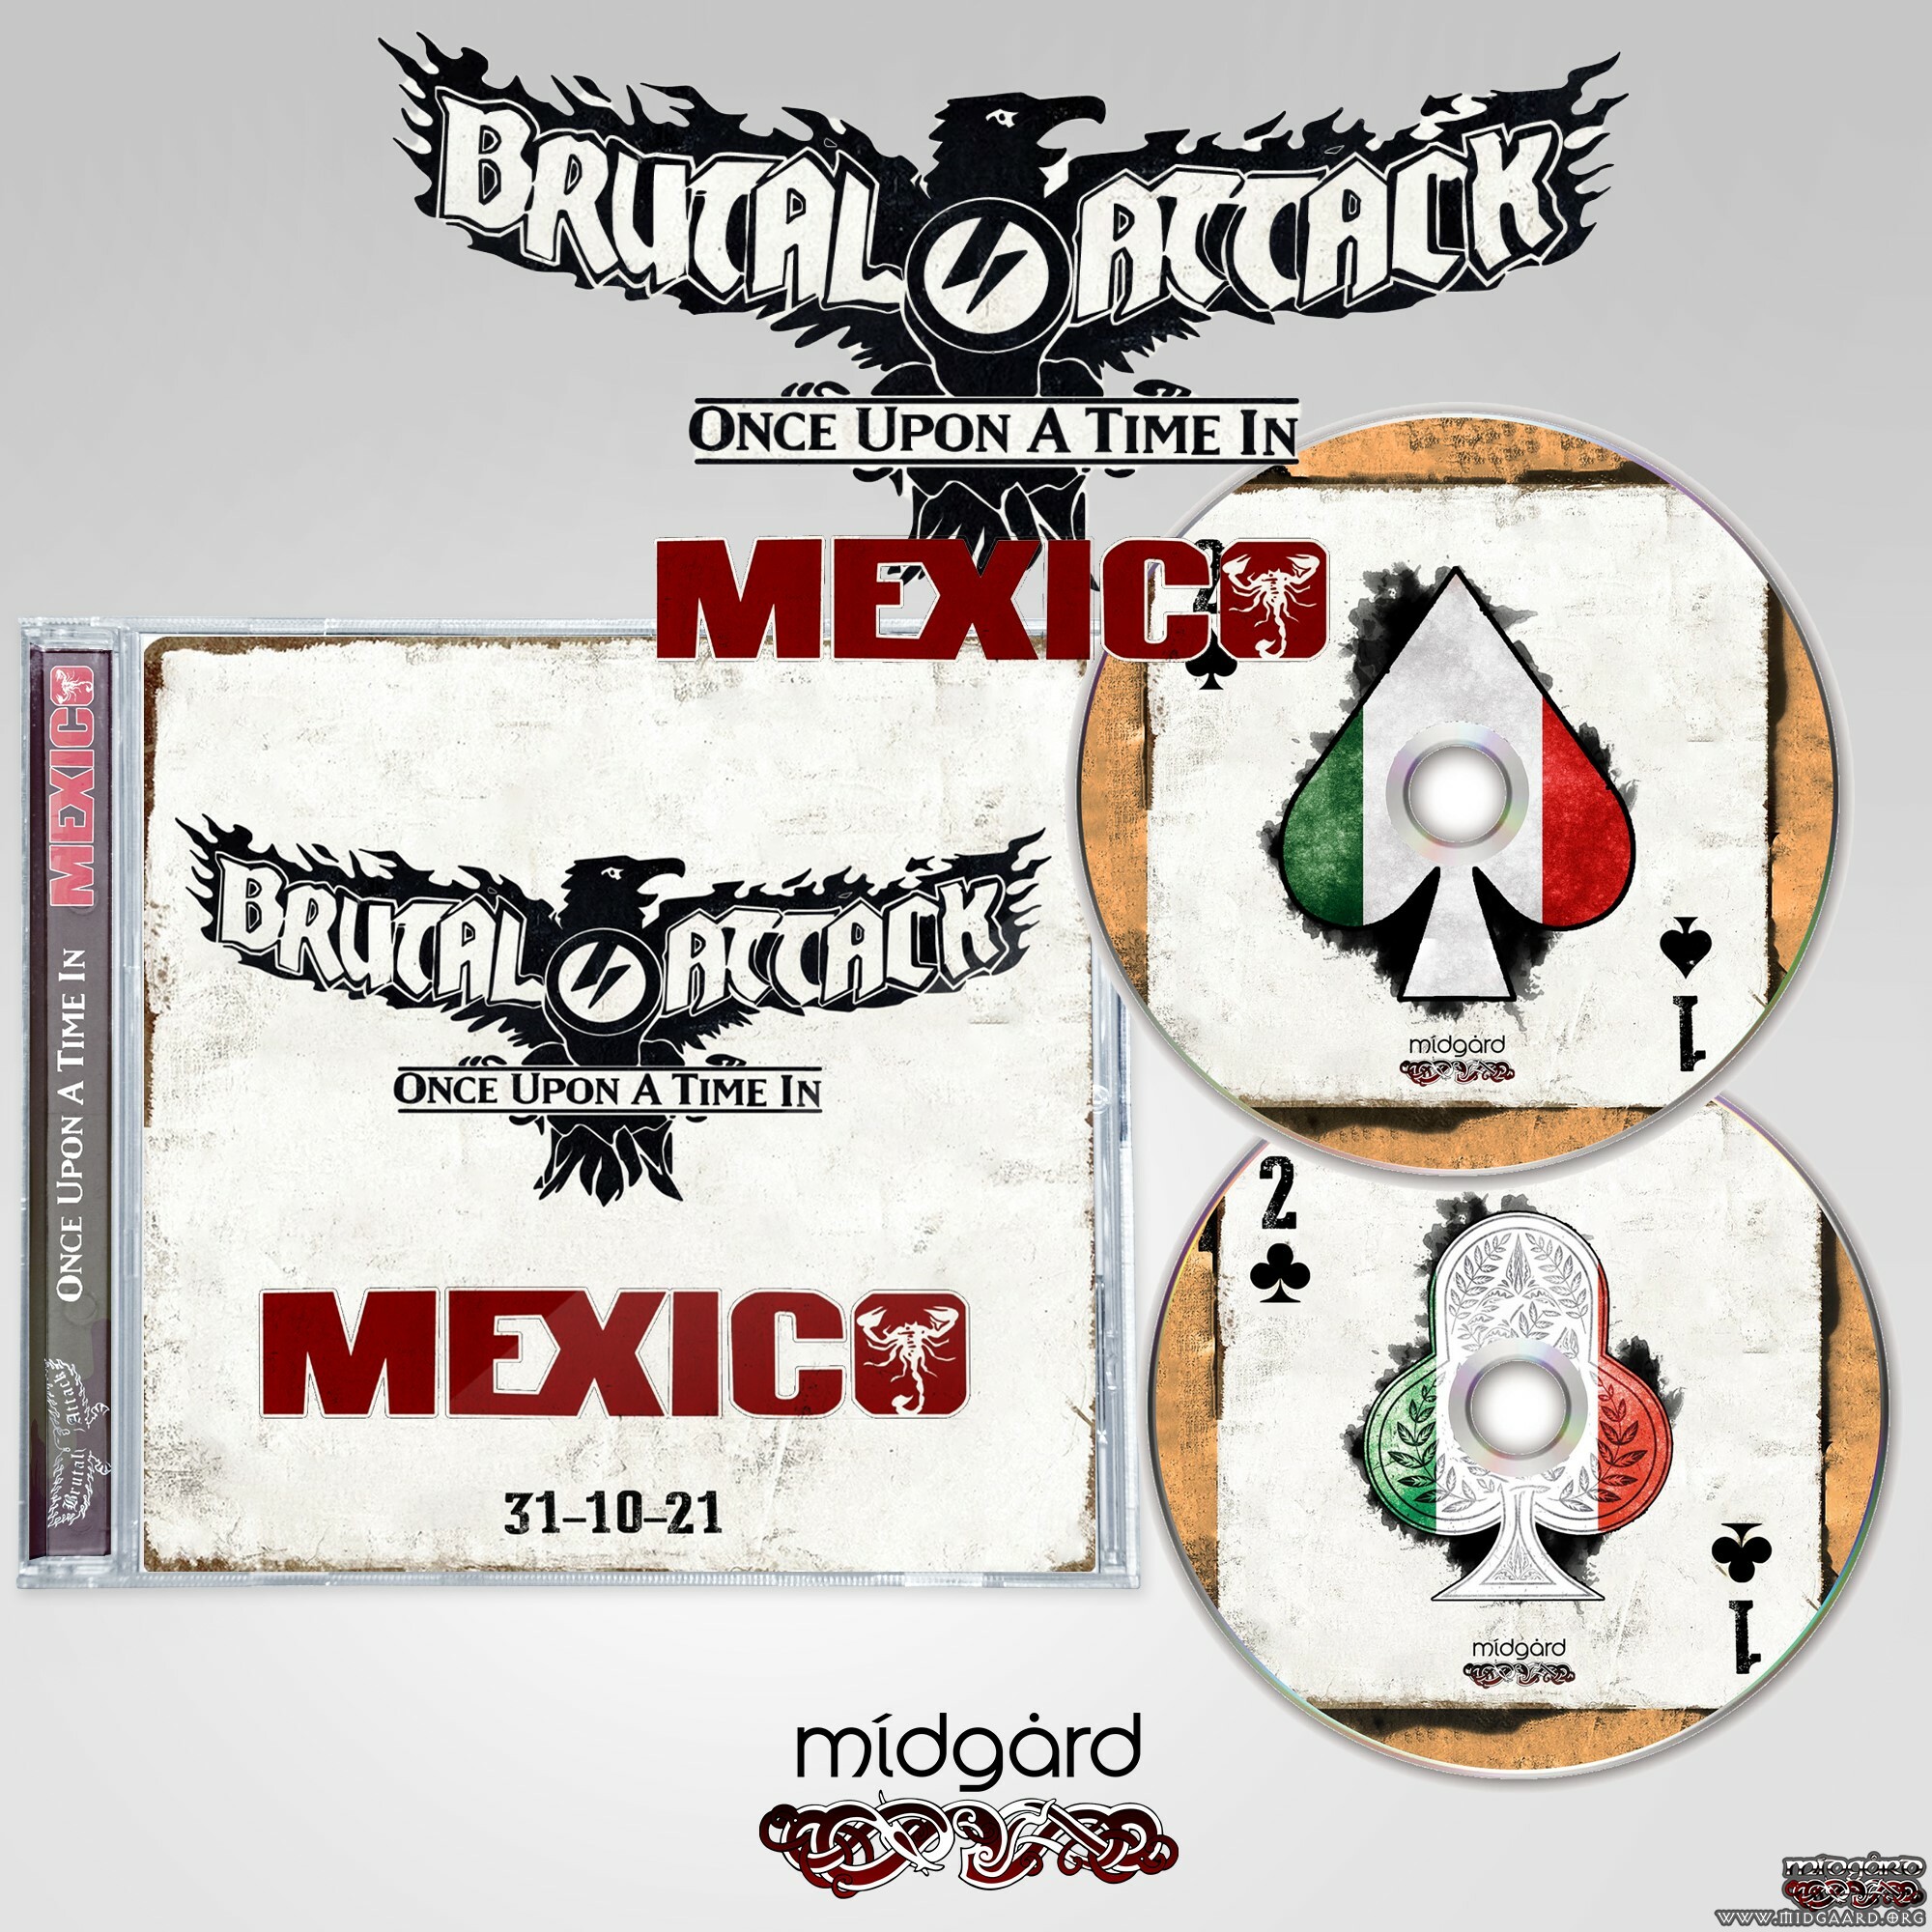 https://midgaardshop.com/images/products/5491-brutal-attack-once-upon-a-time-in-mexcio-1.jpg